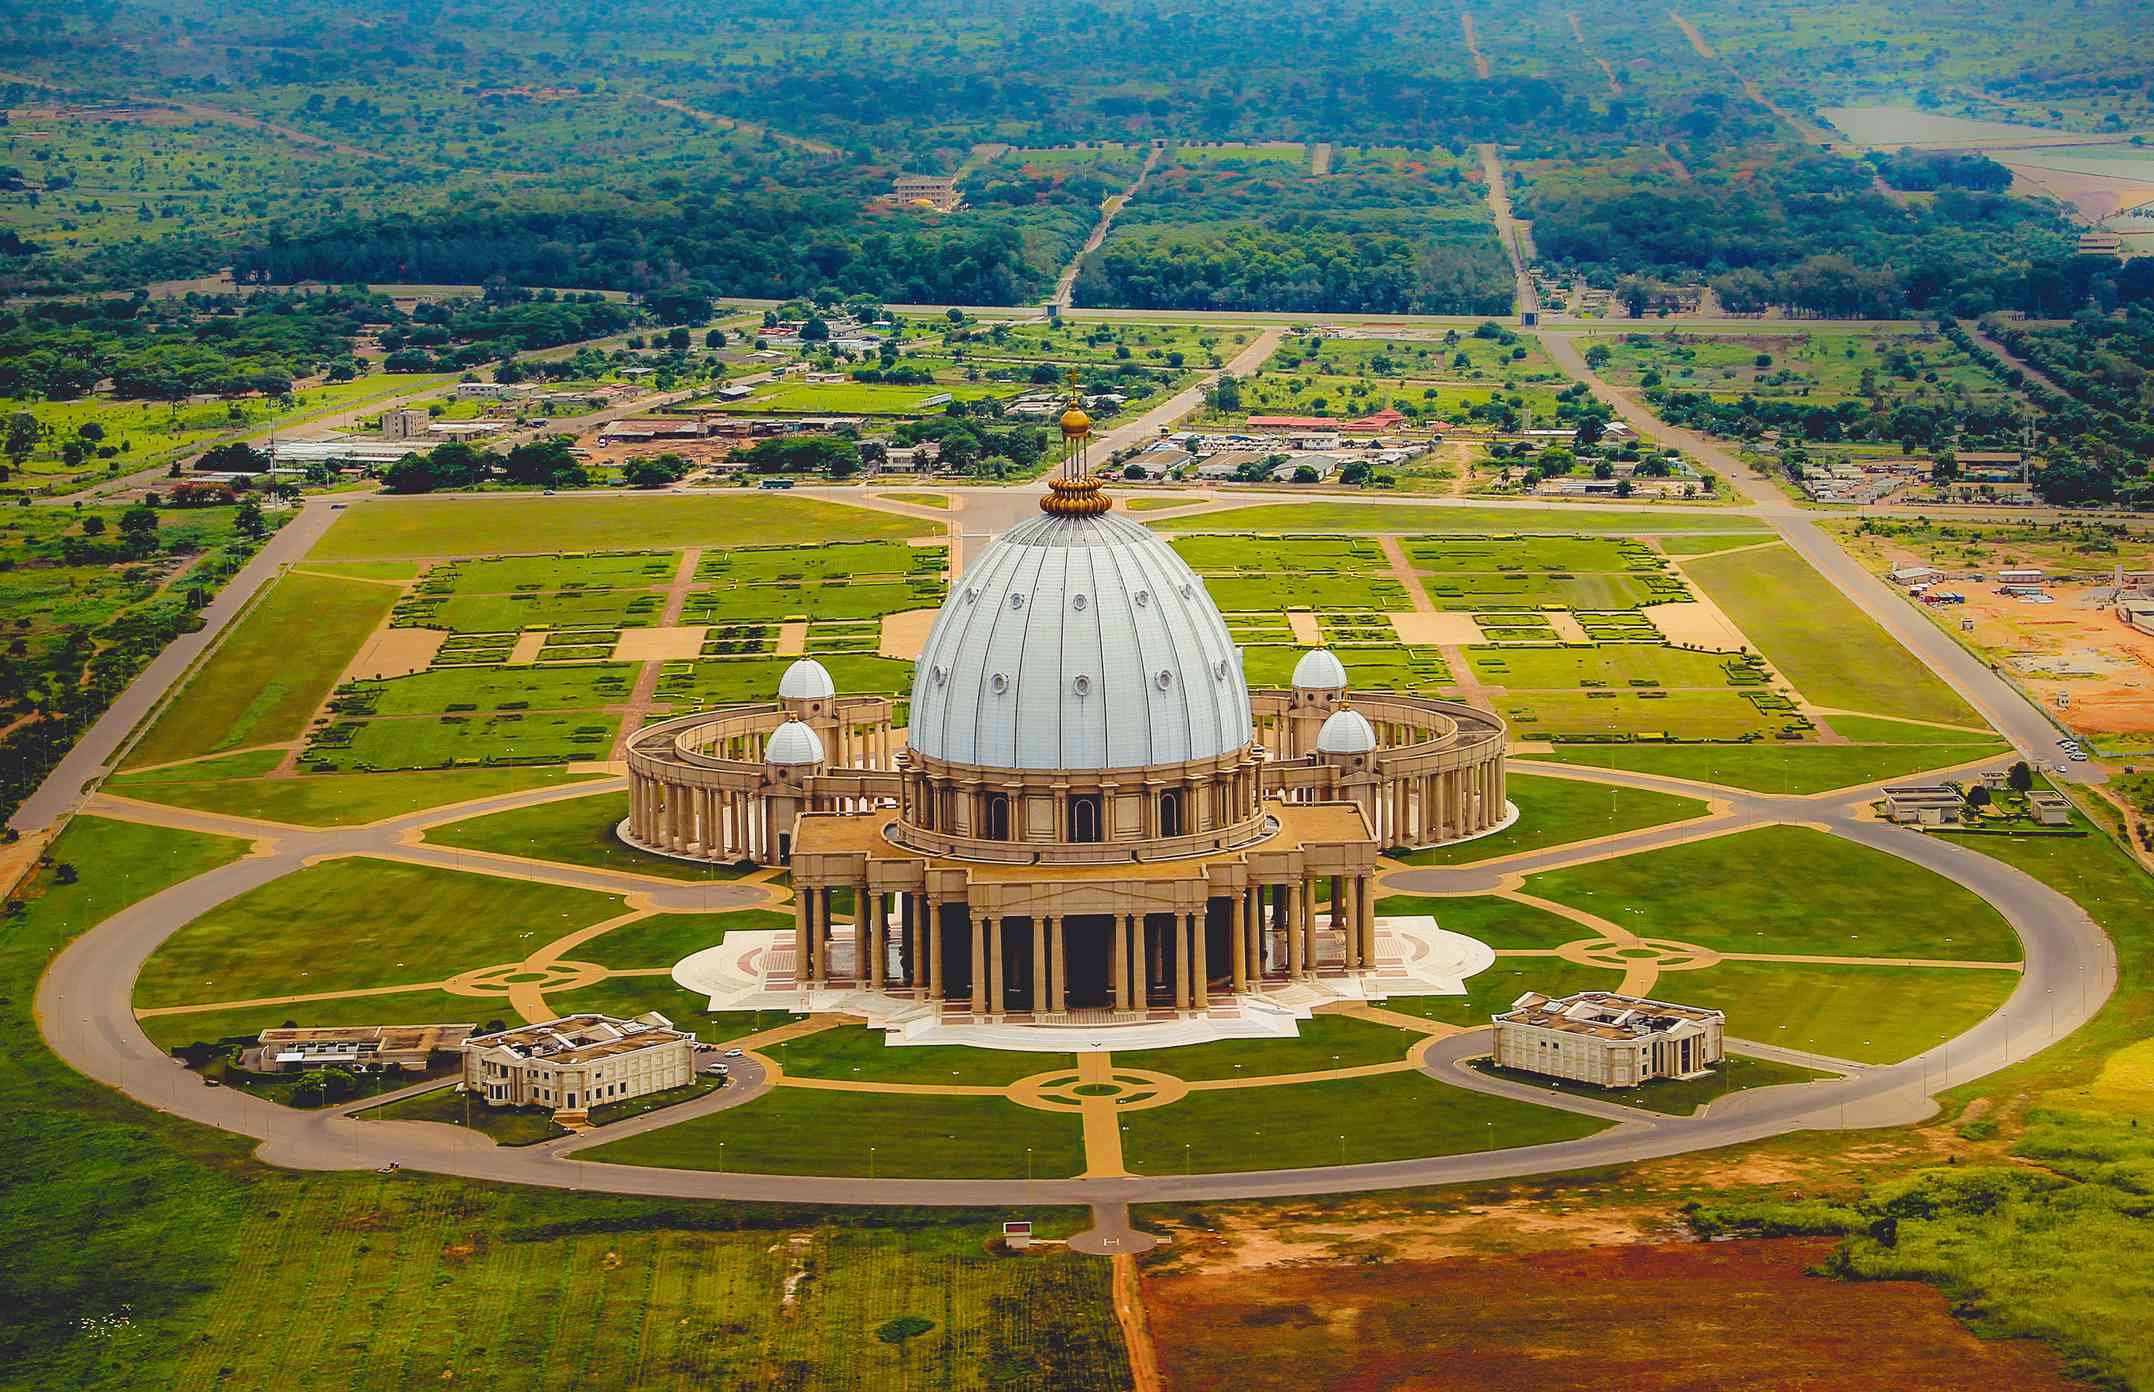 National monument of Côte d’Ivoire - The Basilica of Our Lady of Peace